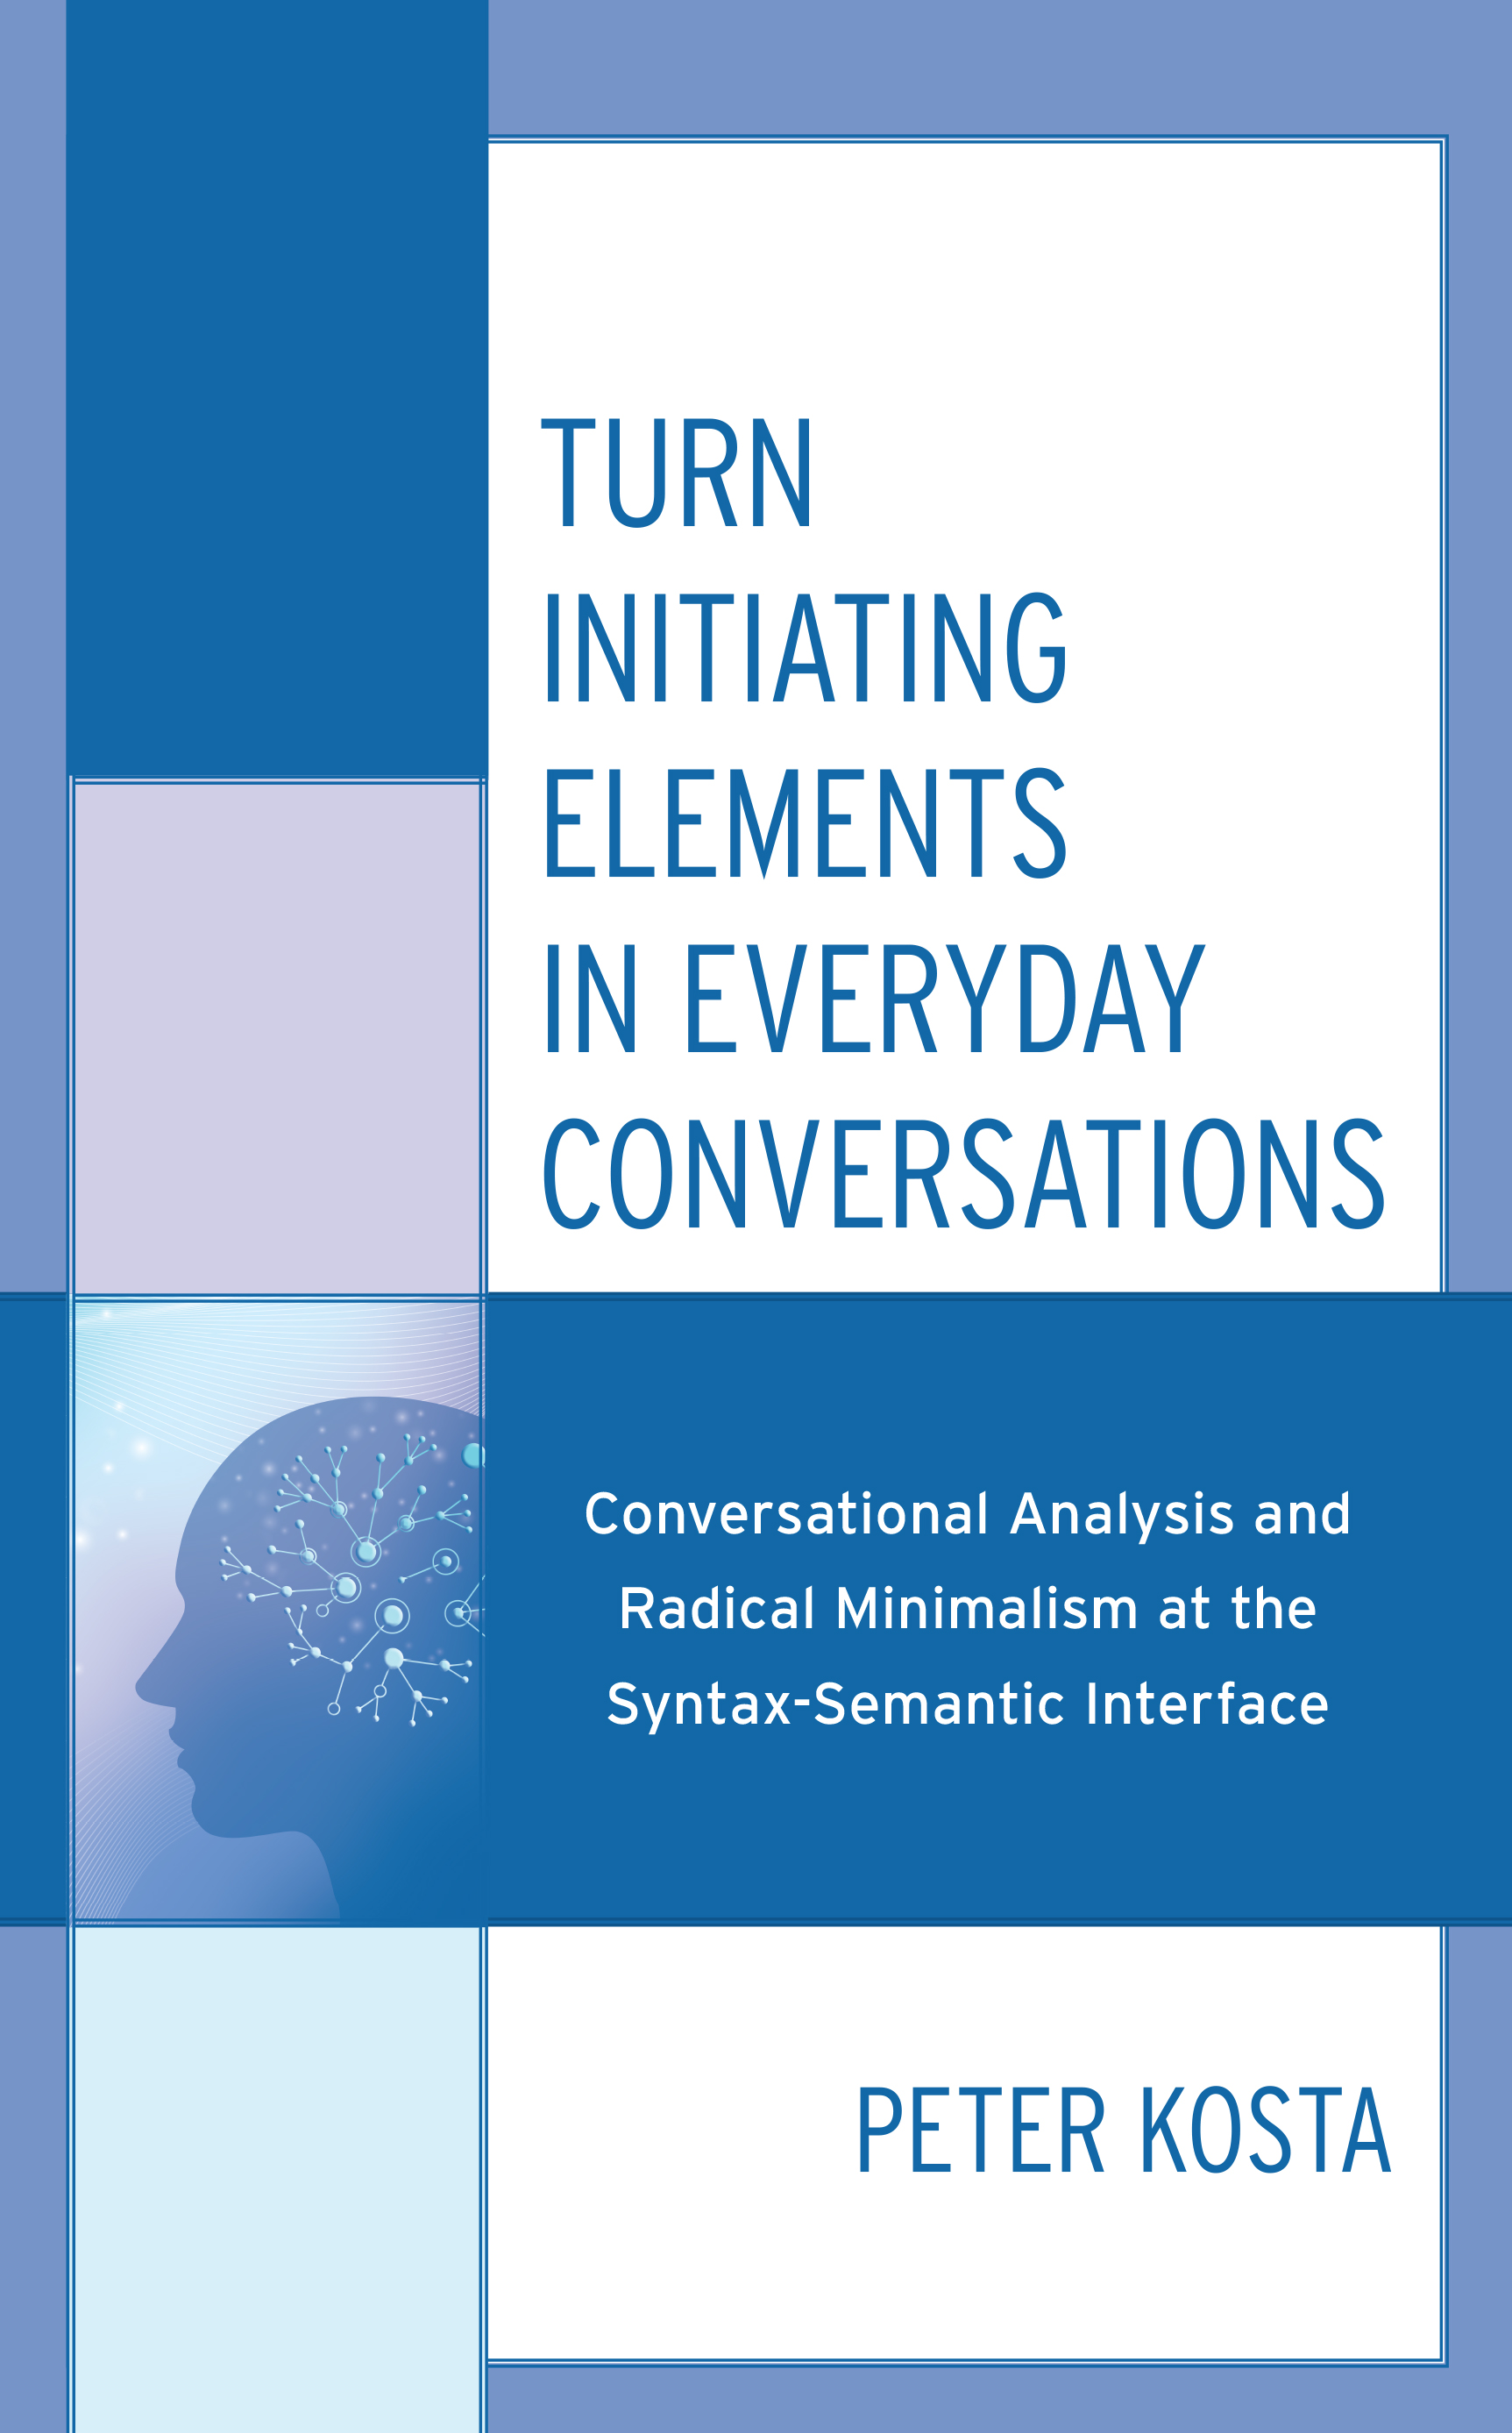 Turn Initiating Elements in Everyday Conversations: Conversational Analysis and Radical Minimalism at the Syntax-Semantic Interface